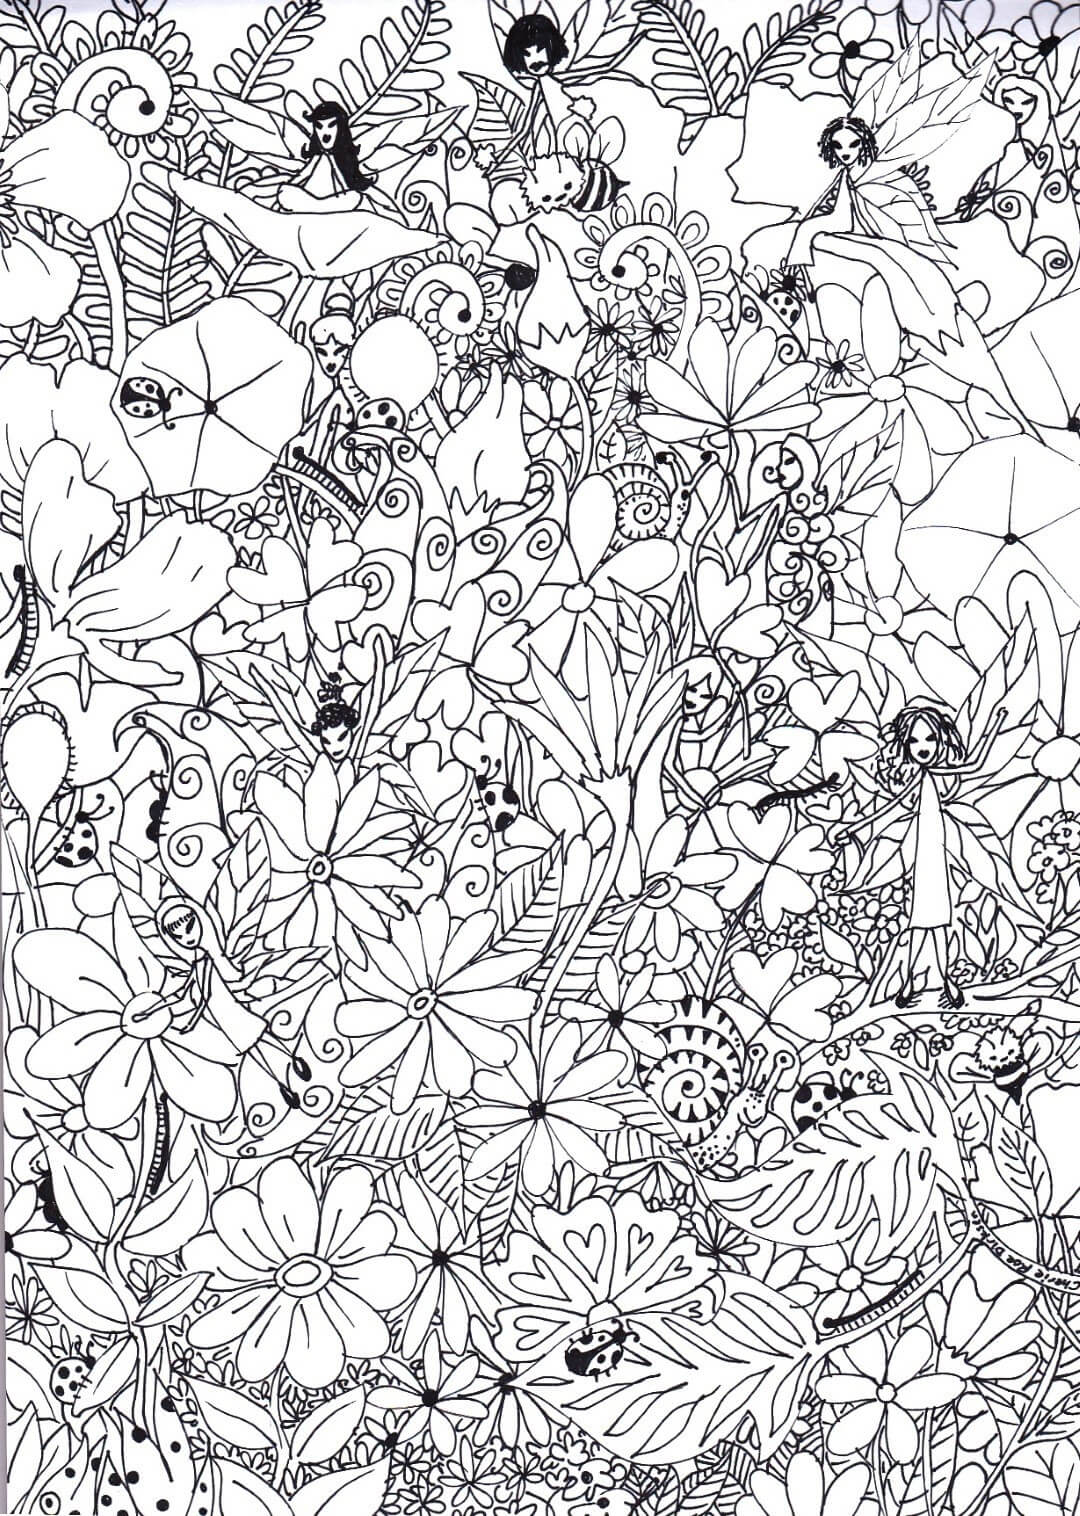 Fairies In The Flowers Coloring Page